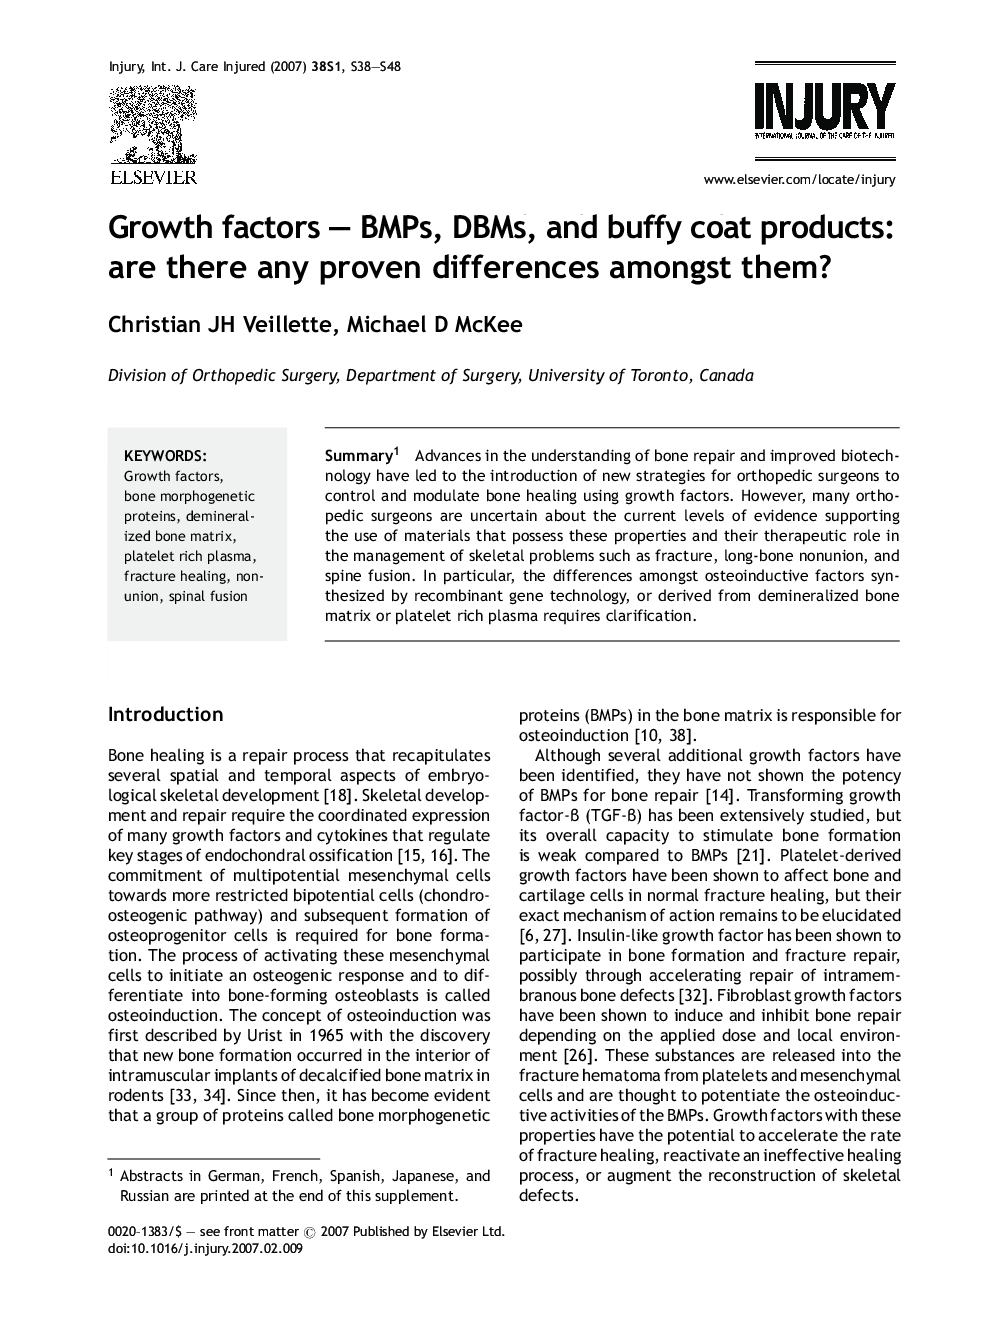 Growth factors — BMPs, DBMs, and buffy coat products: are there any proven differences amongst them? 